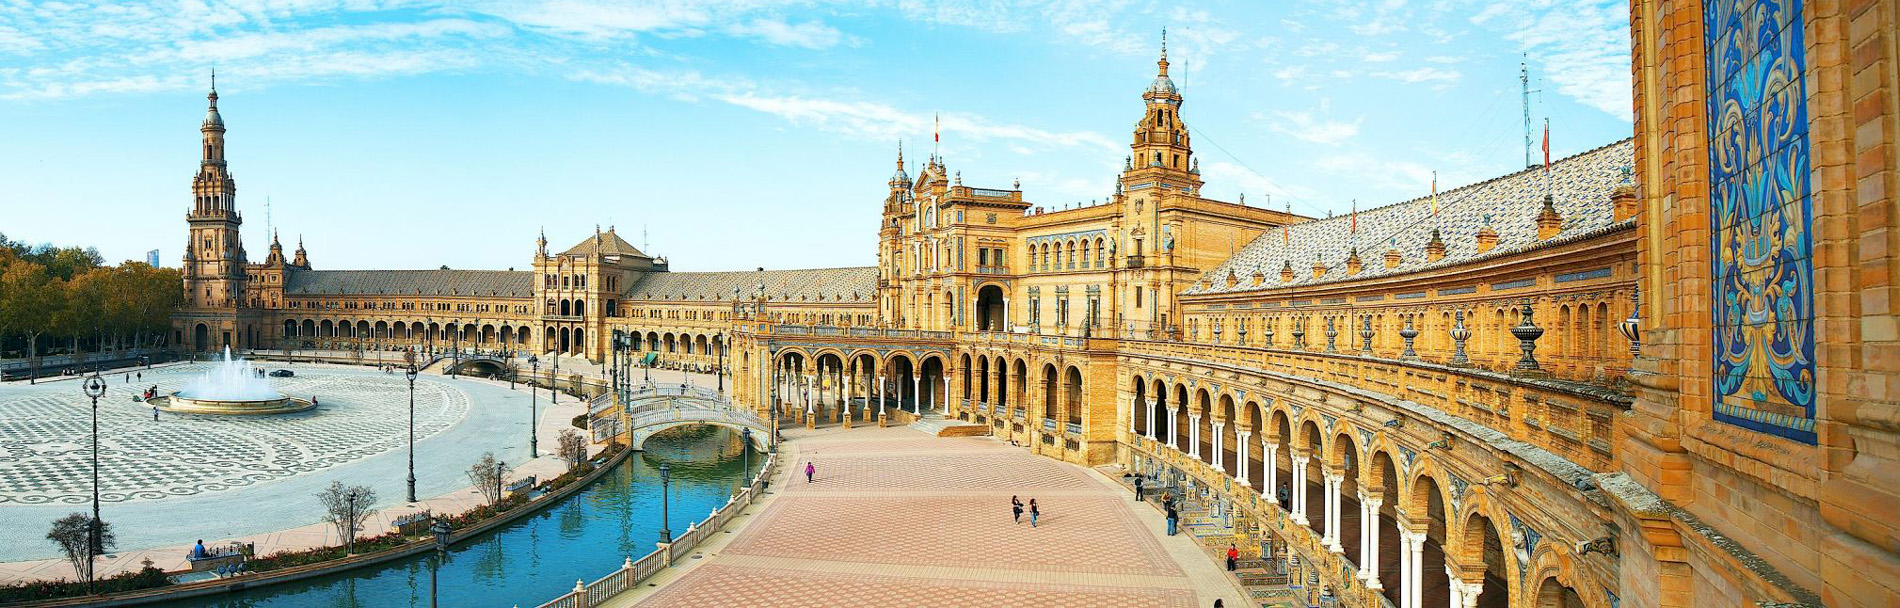 Spain Tour Package - 3 Nights